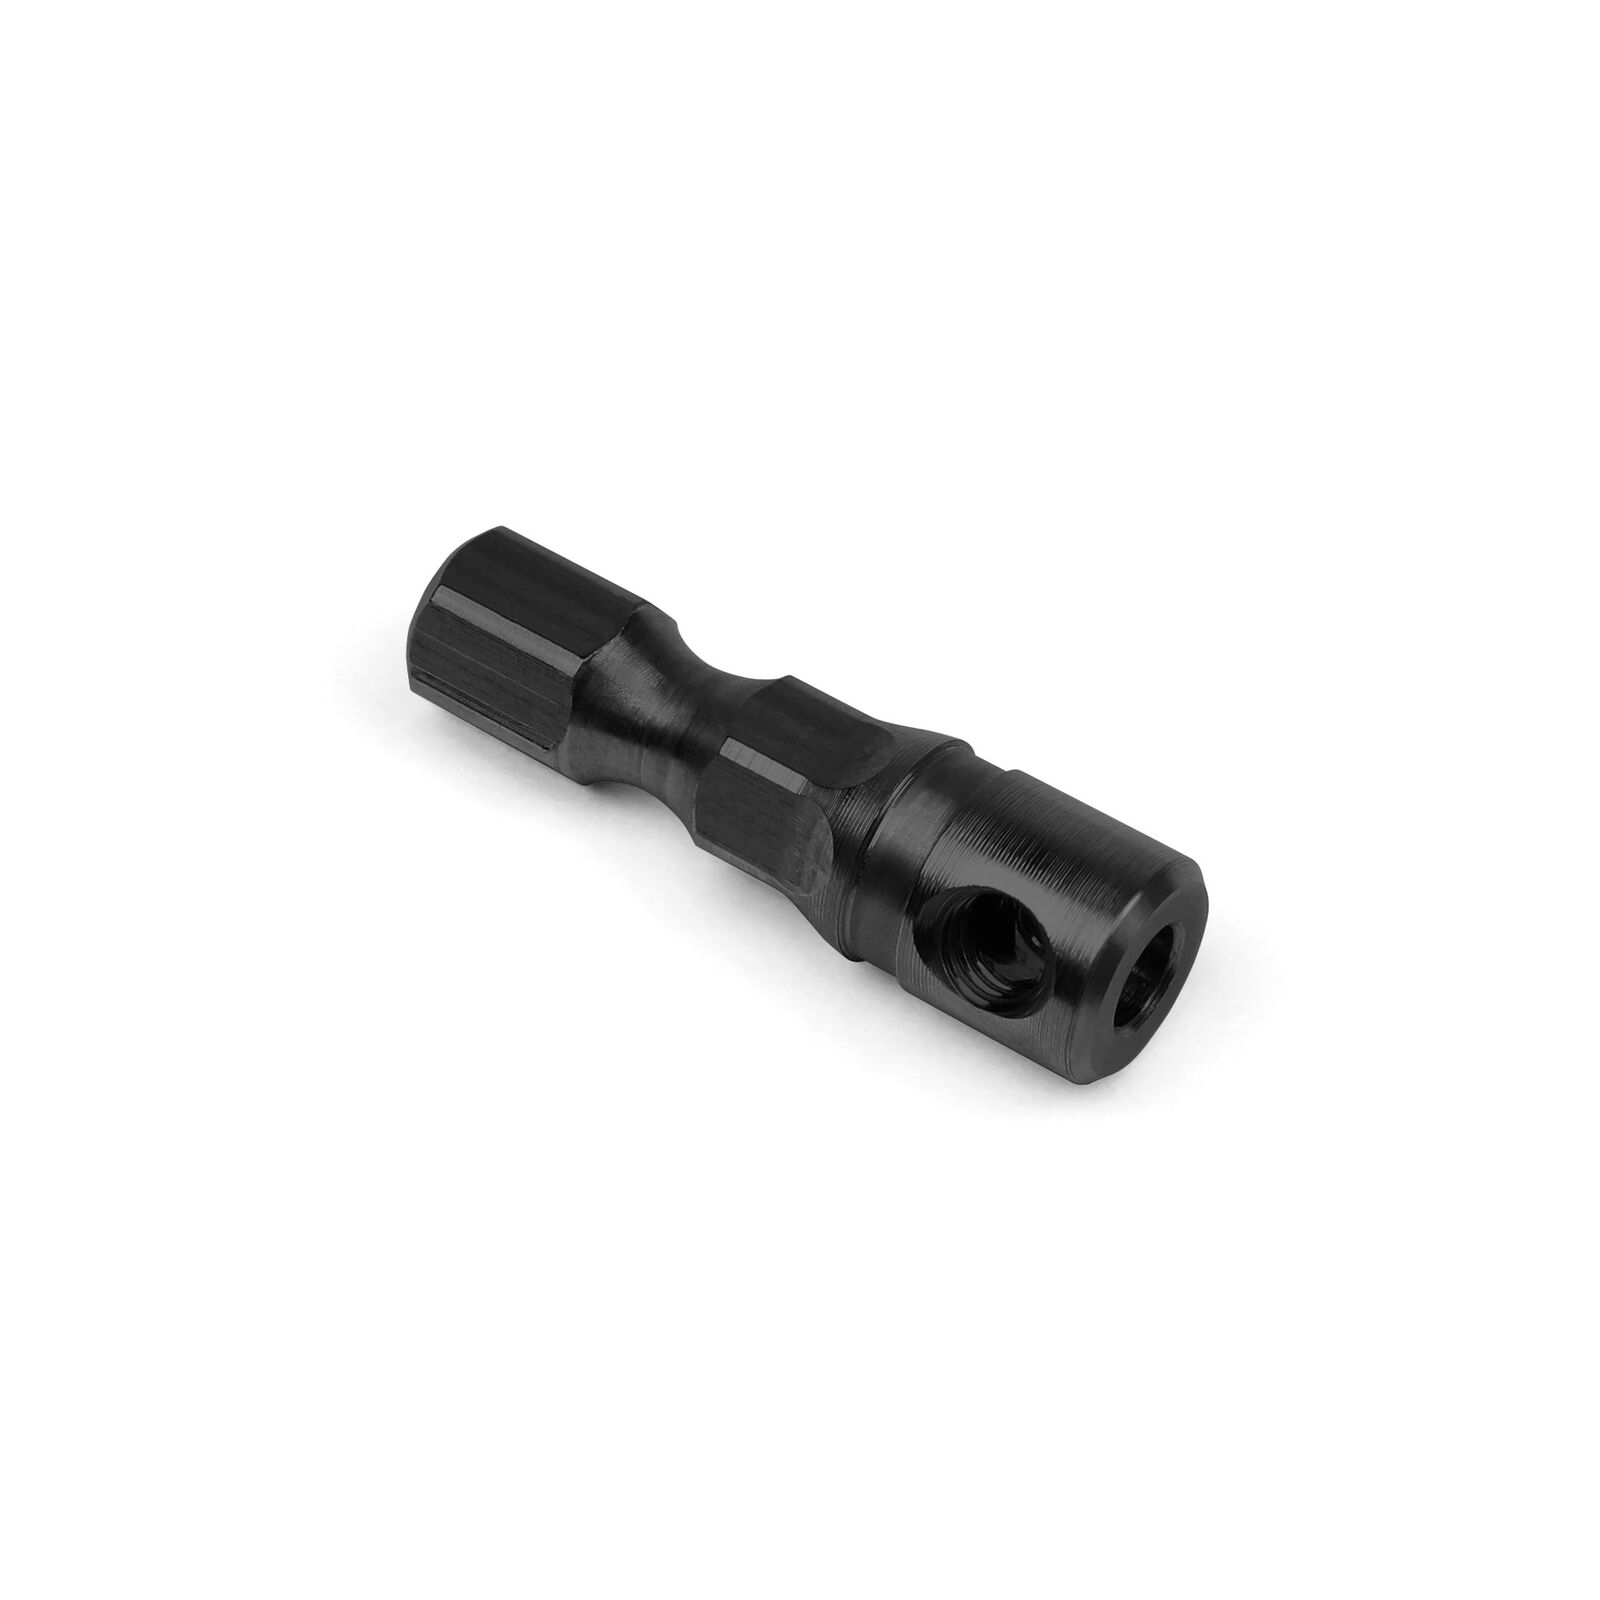 1/4" Hex Drive Adapter 3.5mm Tips